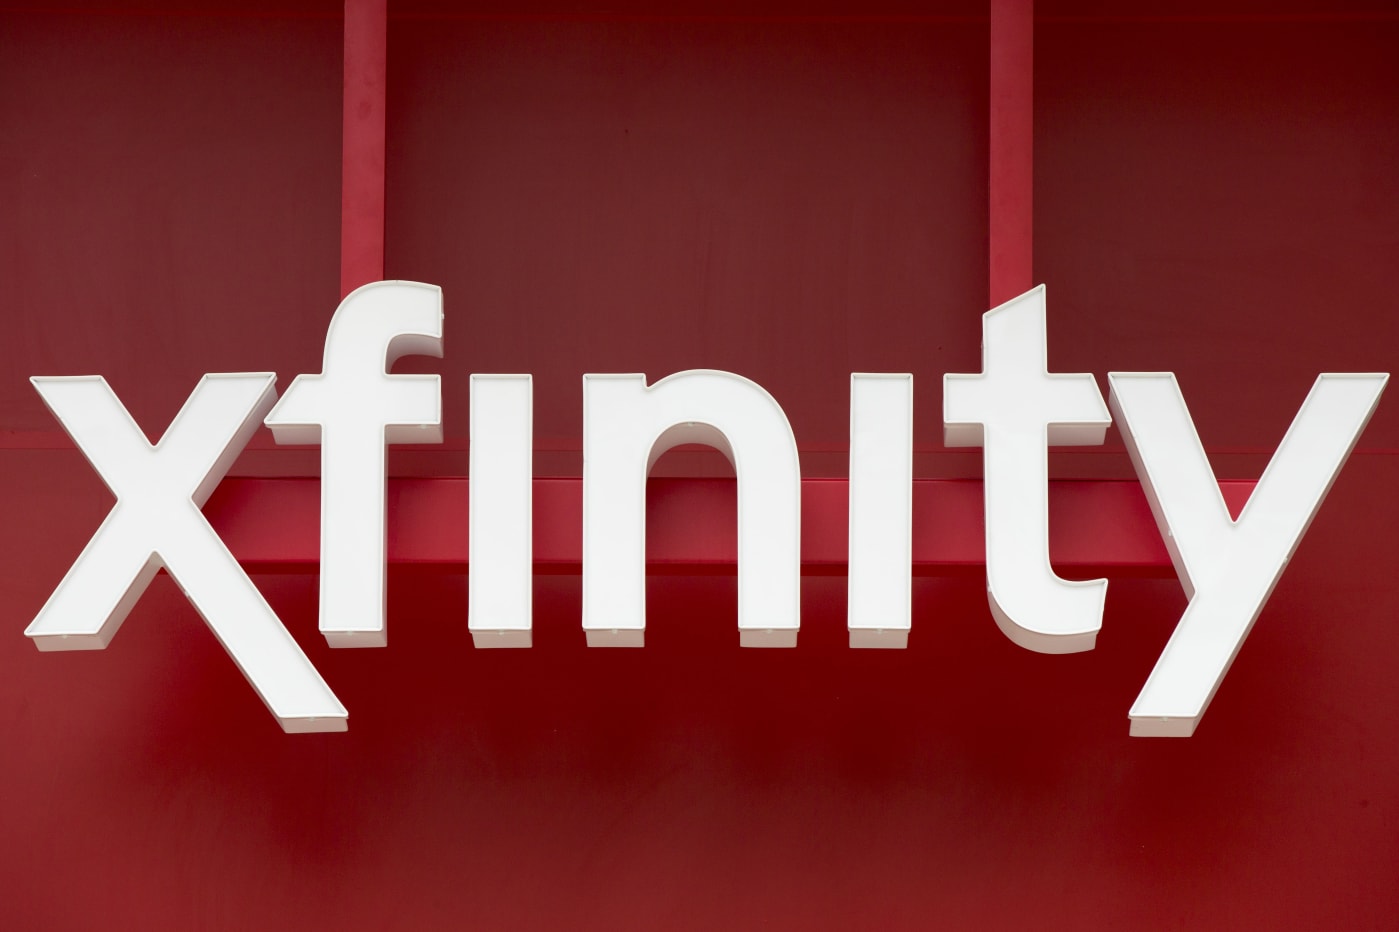 Comcast agrees to kill 10G branding after advertising watchdogs said it was misleading